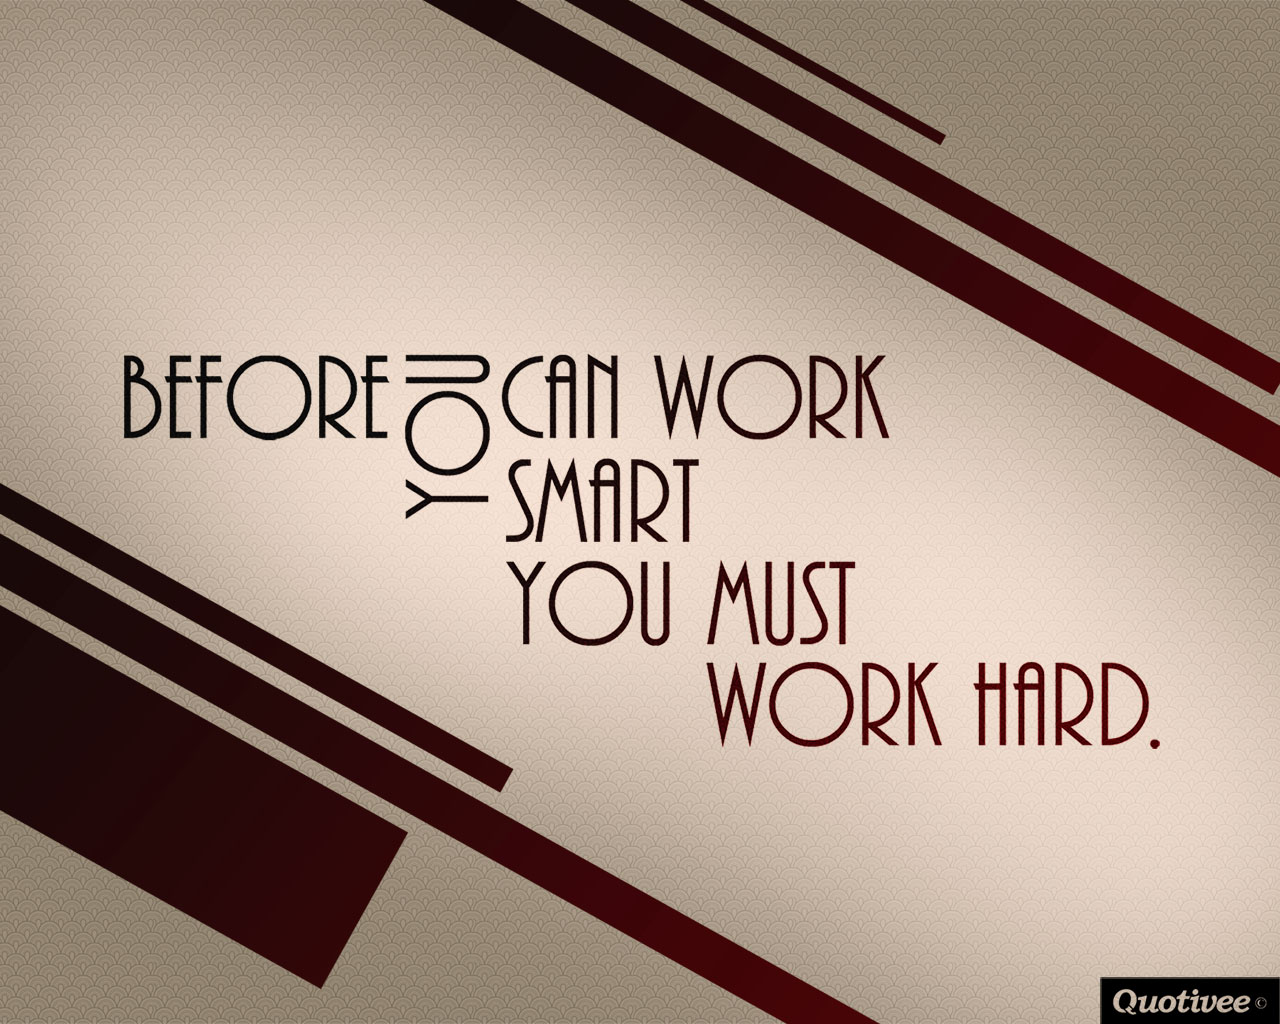  Wallpaper on Work Hard Before you can work smart you must work hard 1280x1024